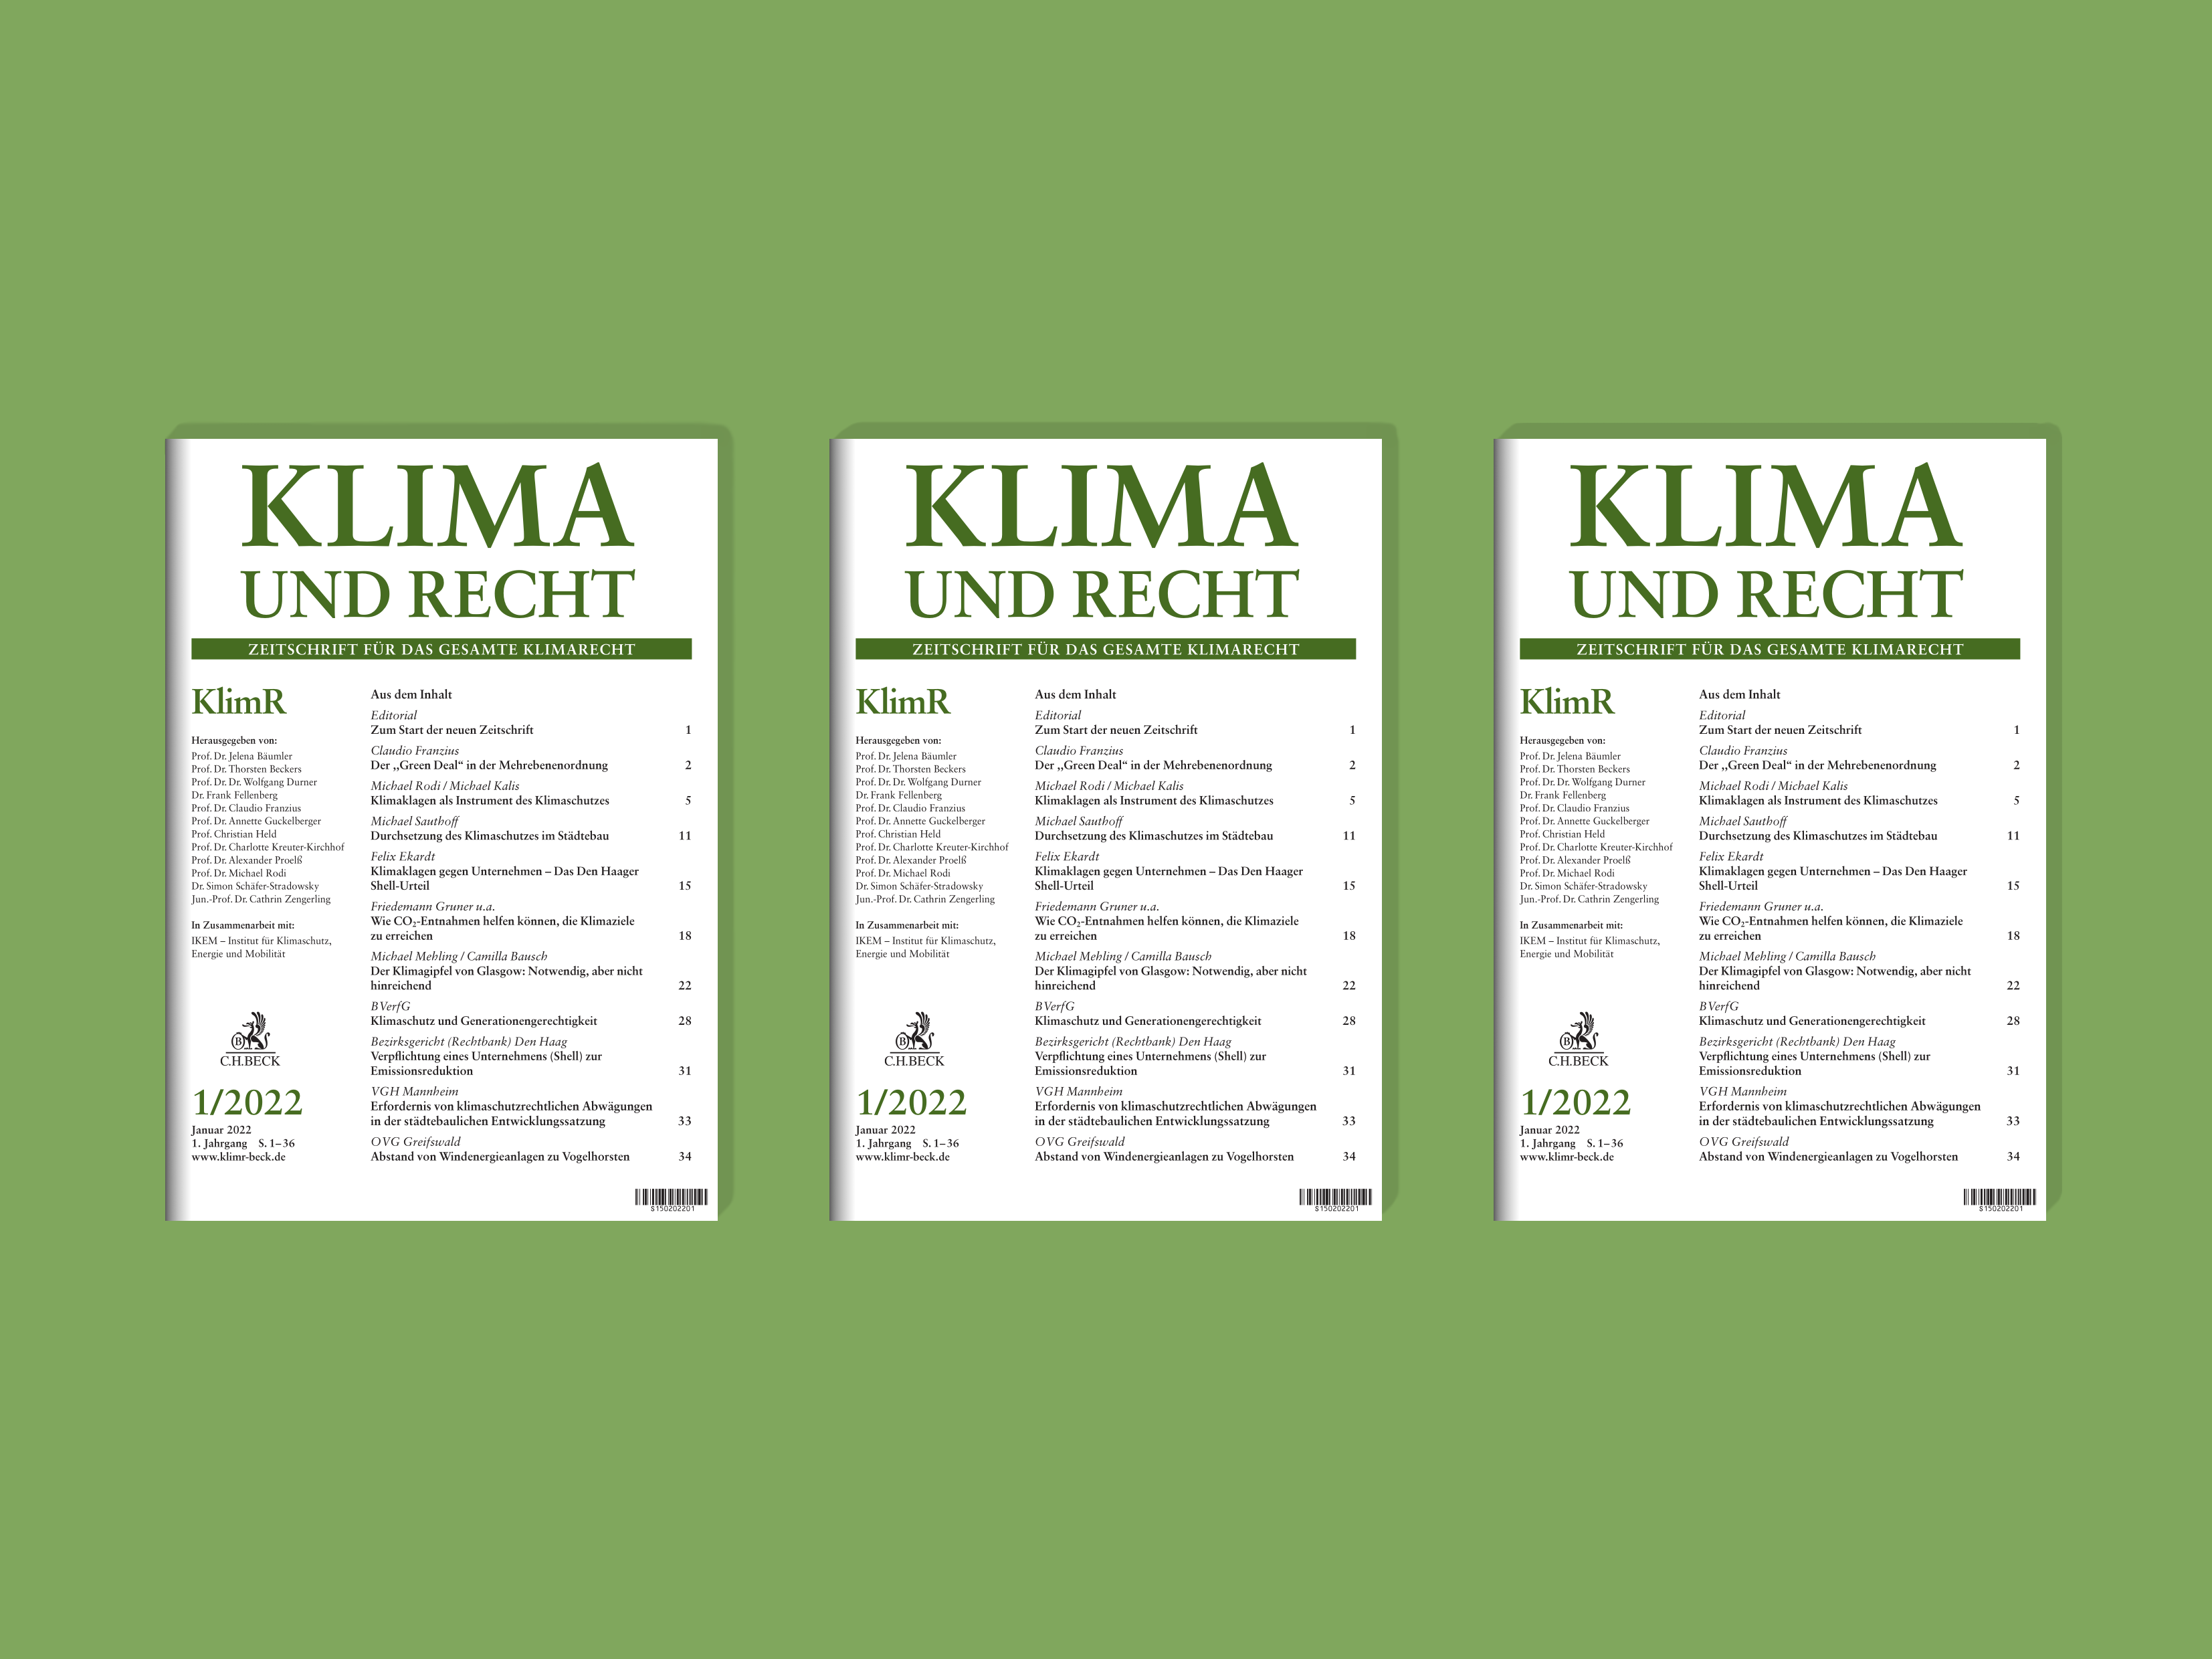 Klima und Recht – the first legal journal on climate law